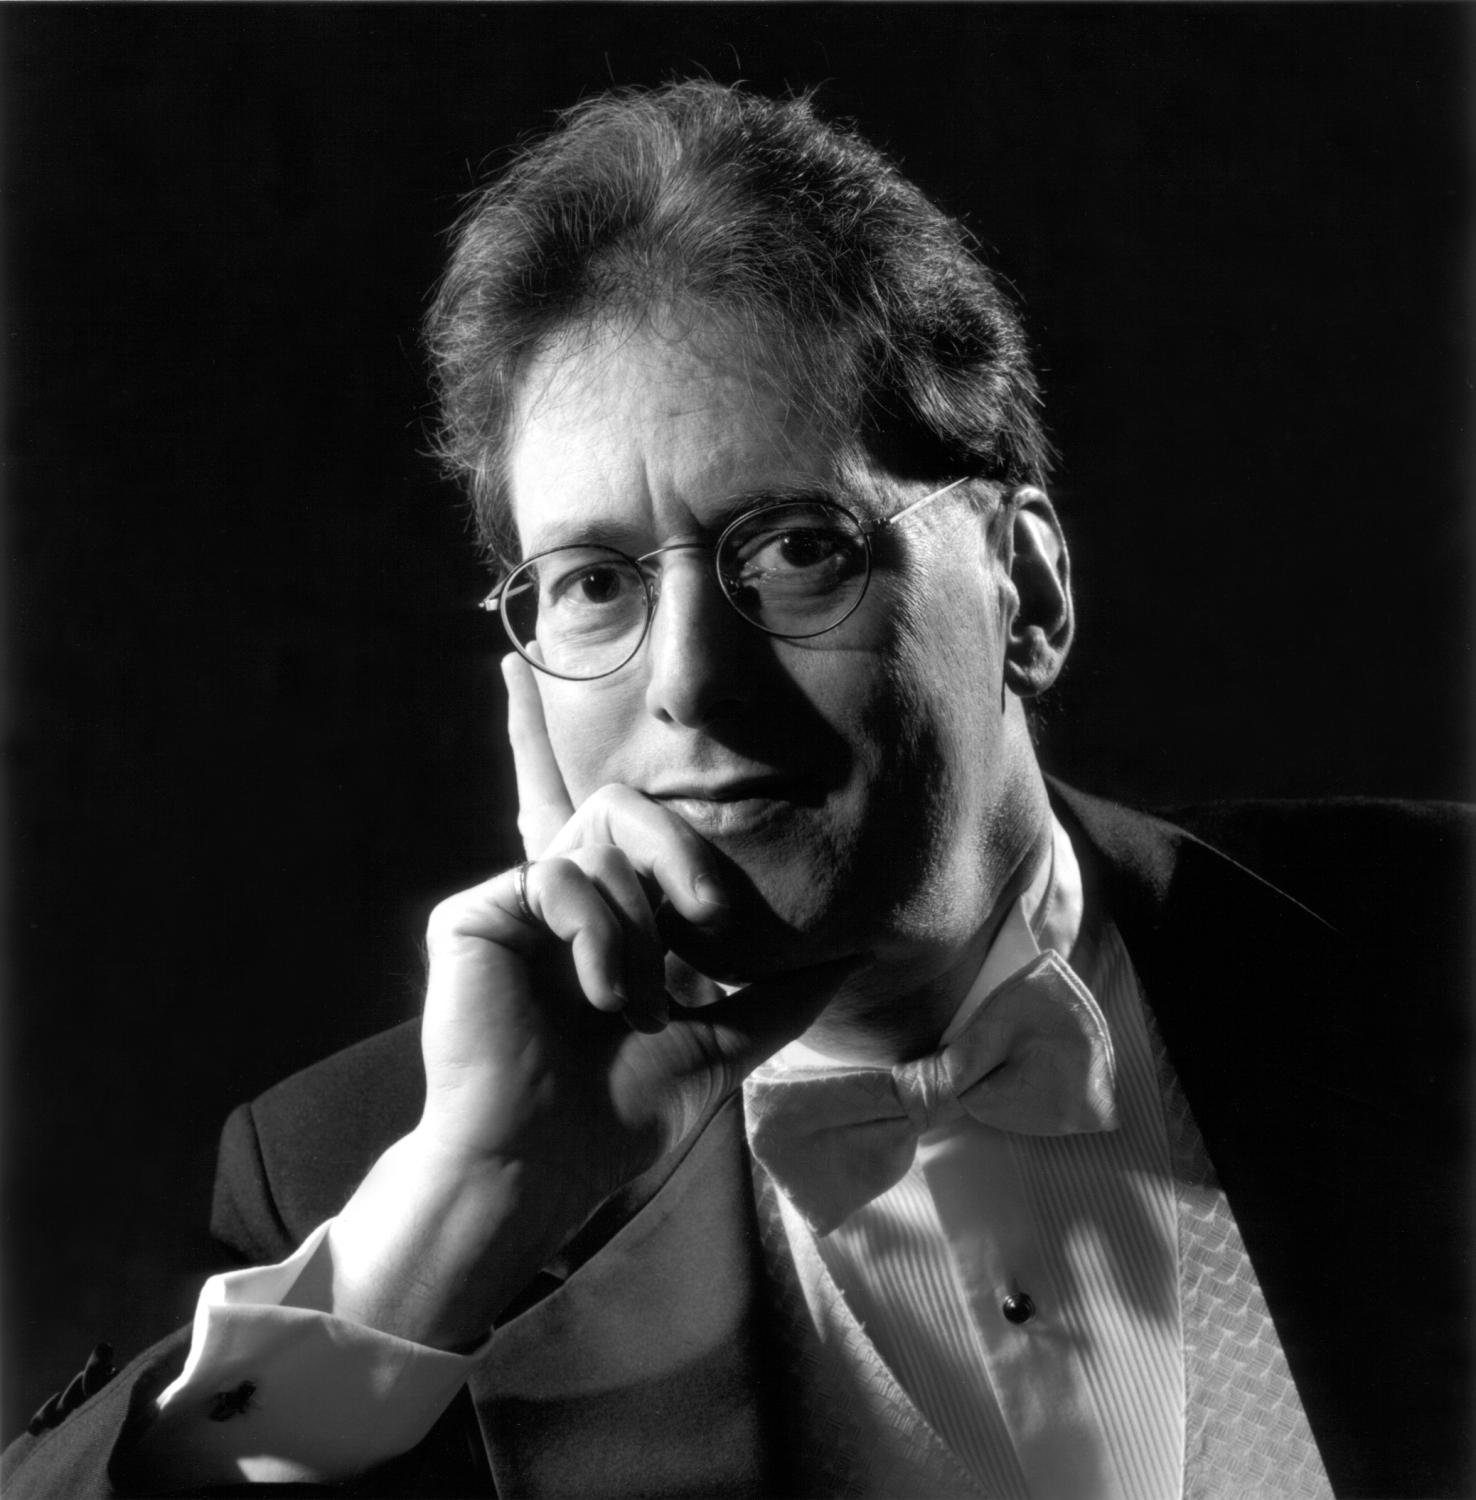 A black and white image of Robert Levin looking into the camera while leaning his head on his hand.